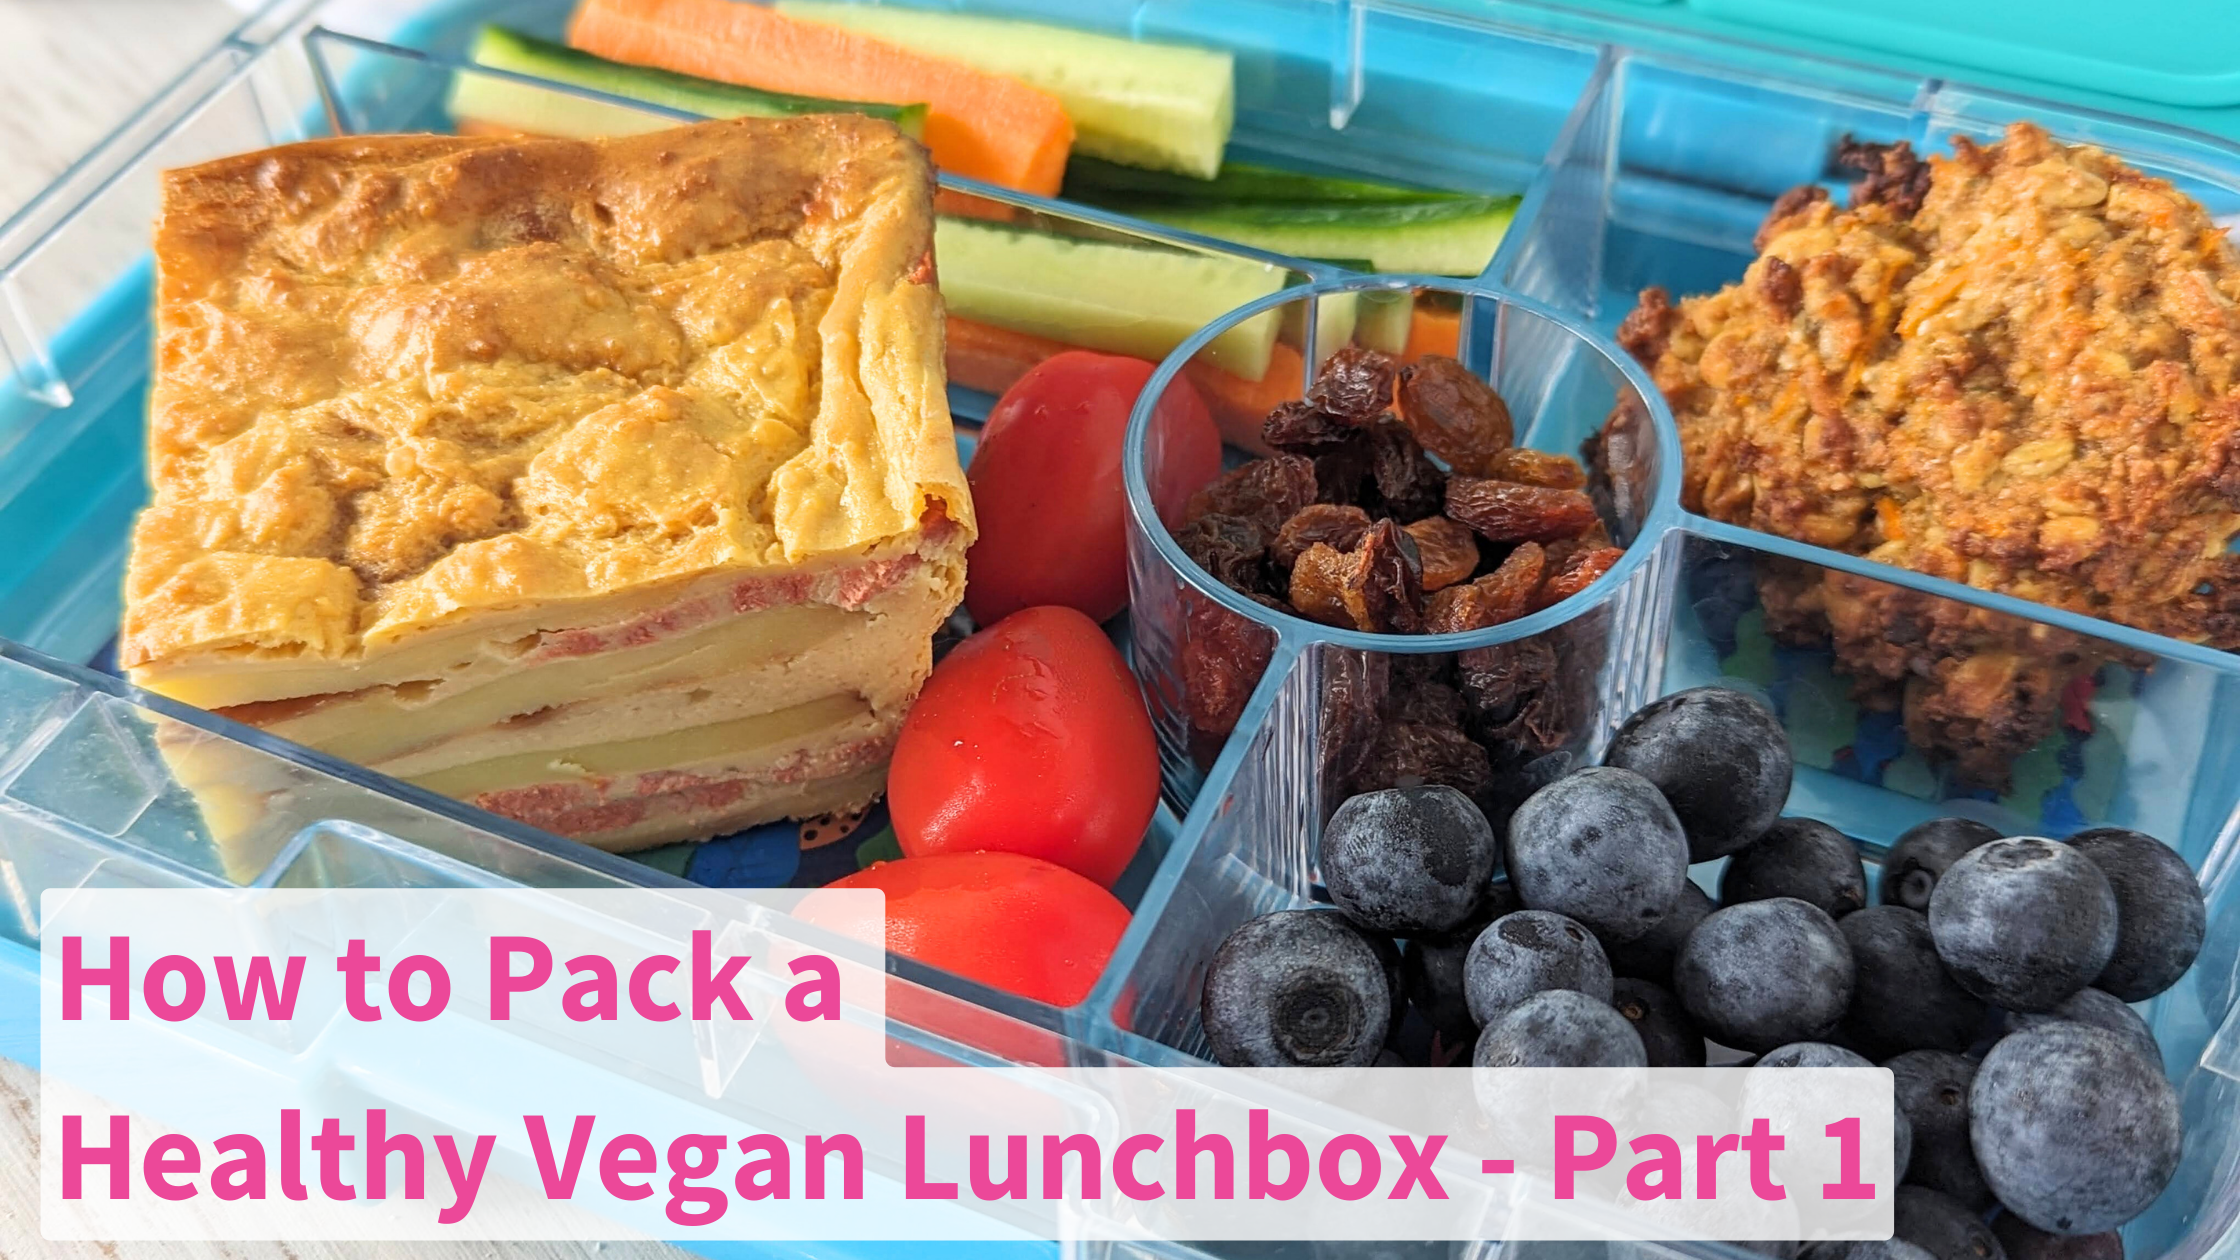 A Vegan Lunchbox with How to Pack a Vegan Lunchbox Part 1 Text